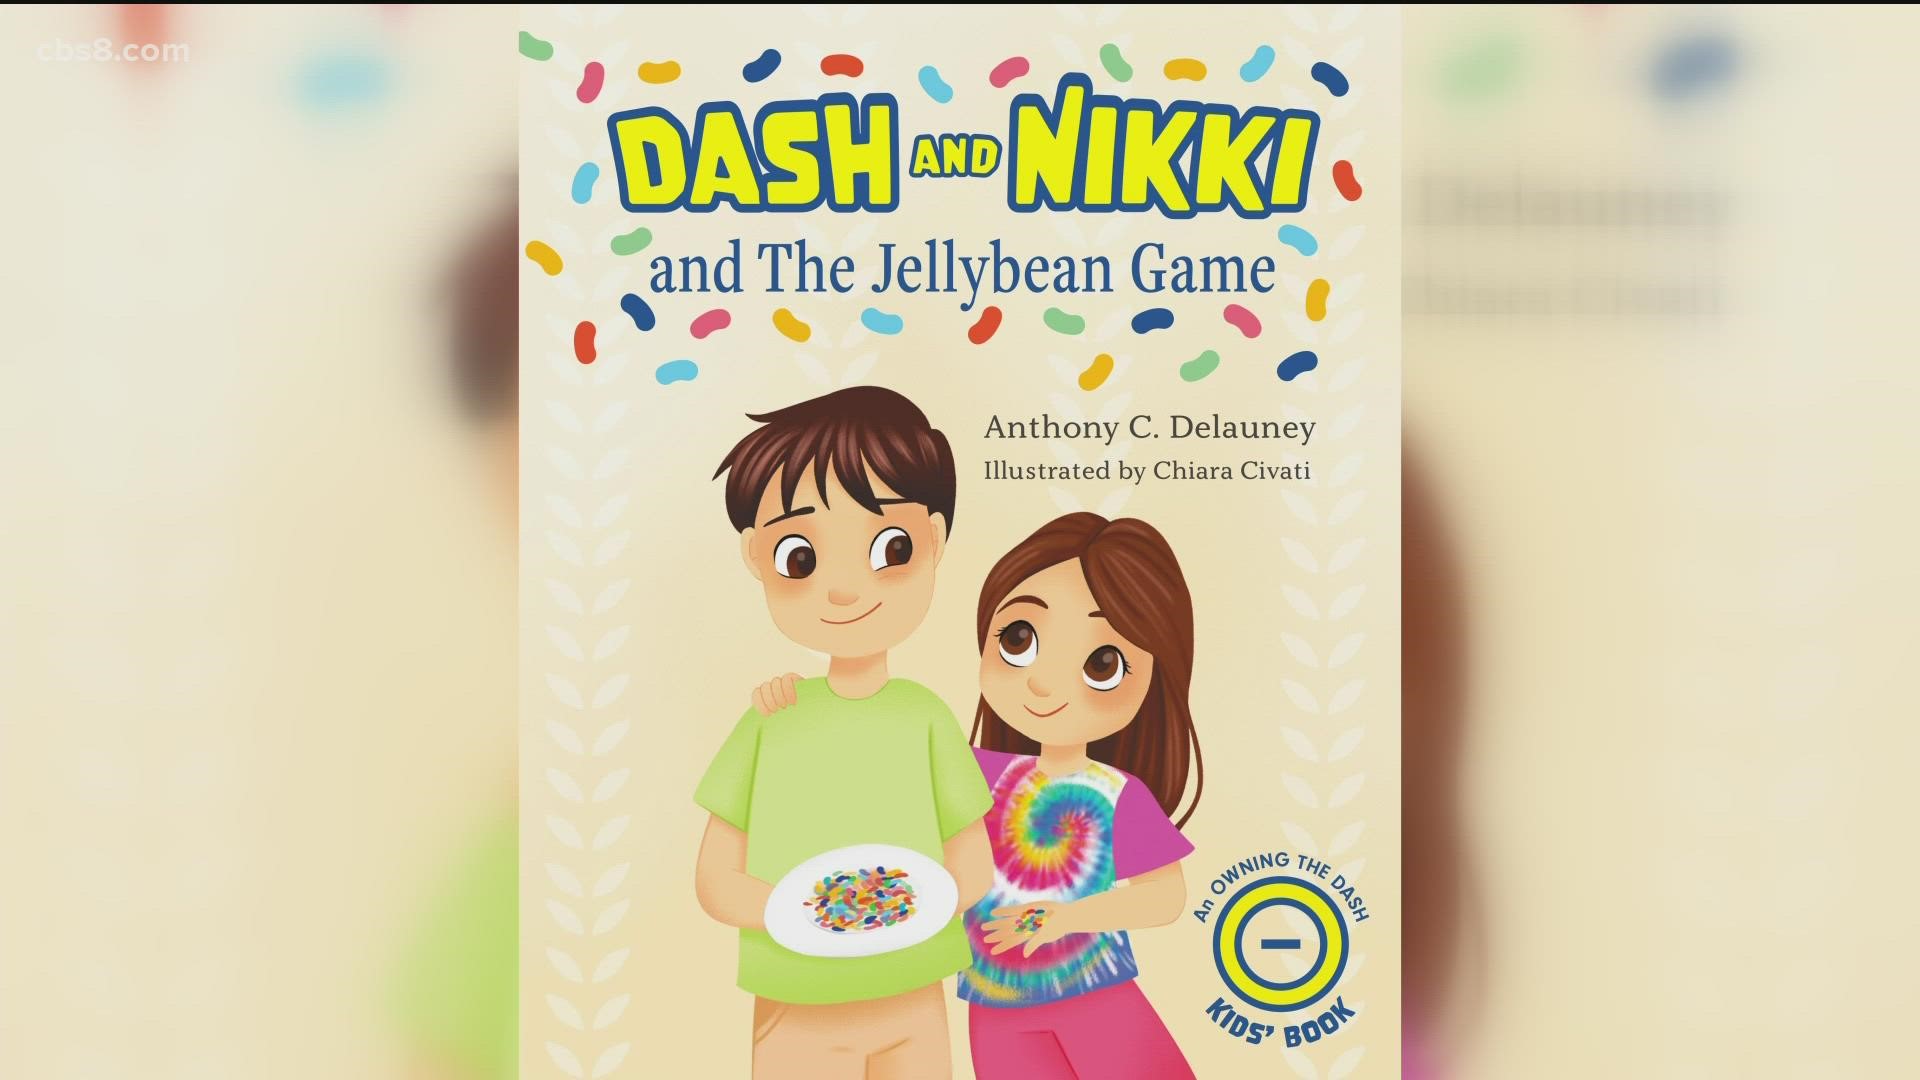 Anthony Delauney's book "Dash and Nikki and the Jellybean Game" teaches kids how to build a healthy relationship with money and saving.